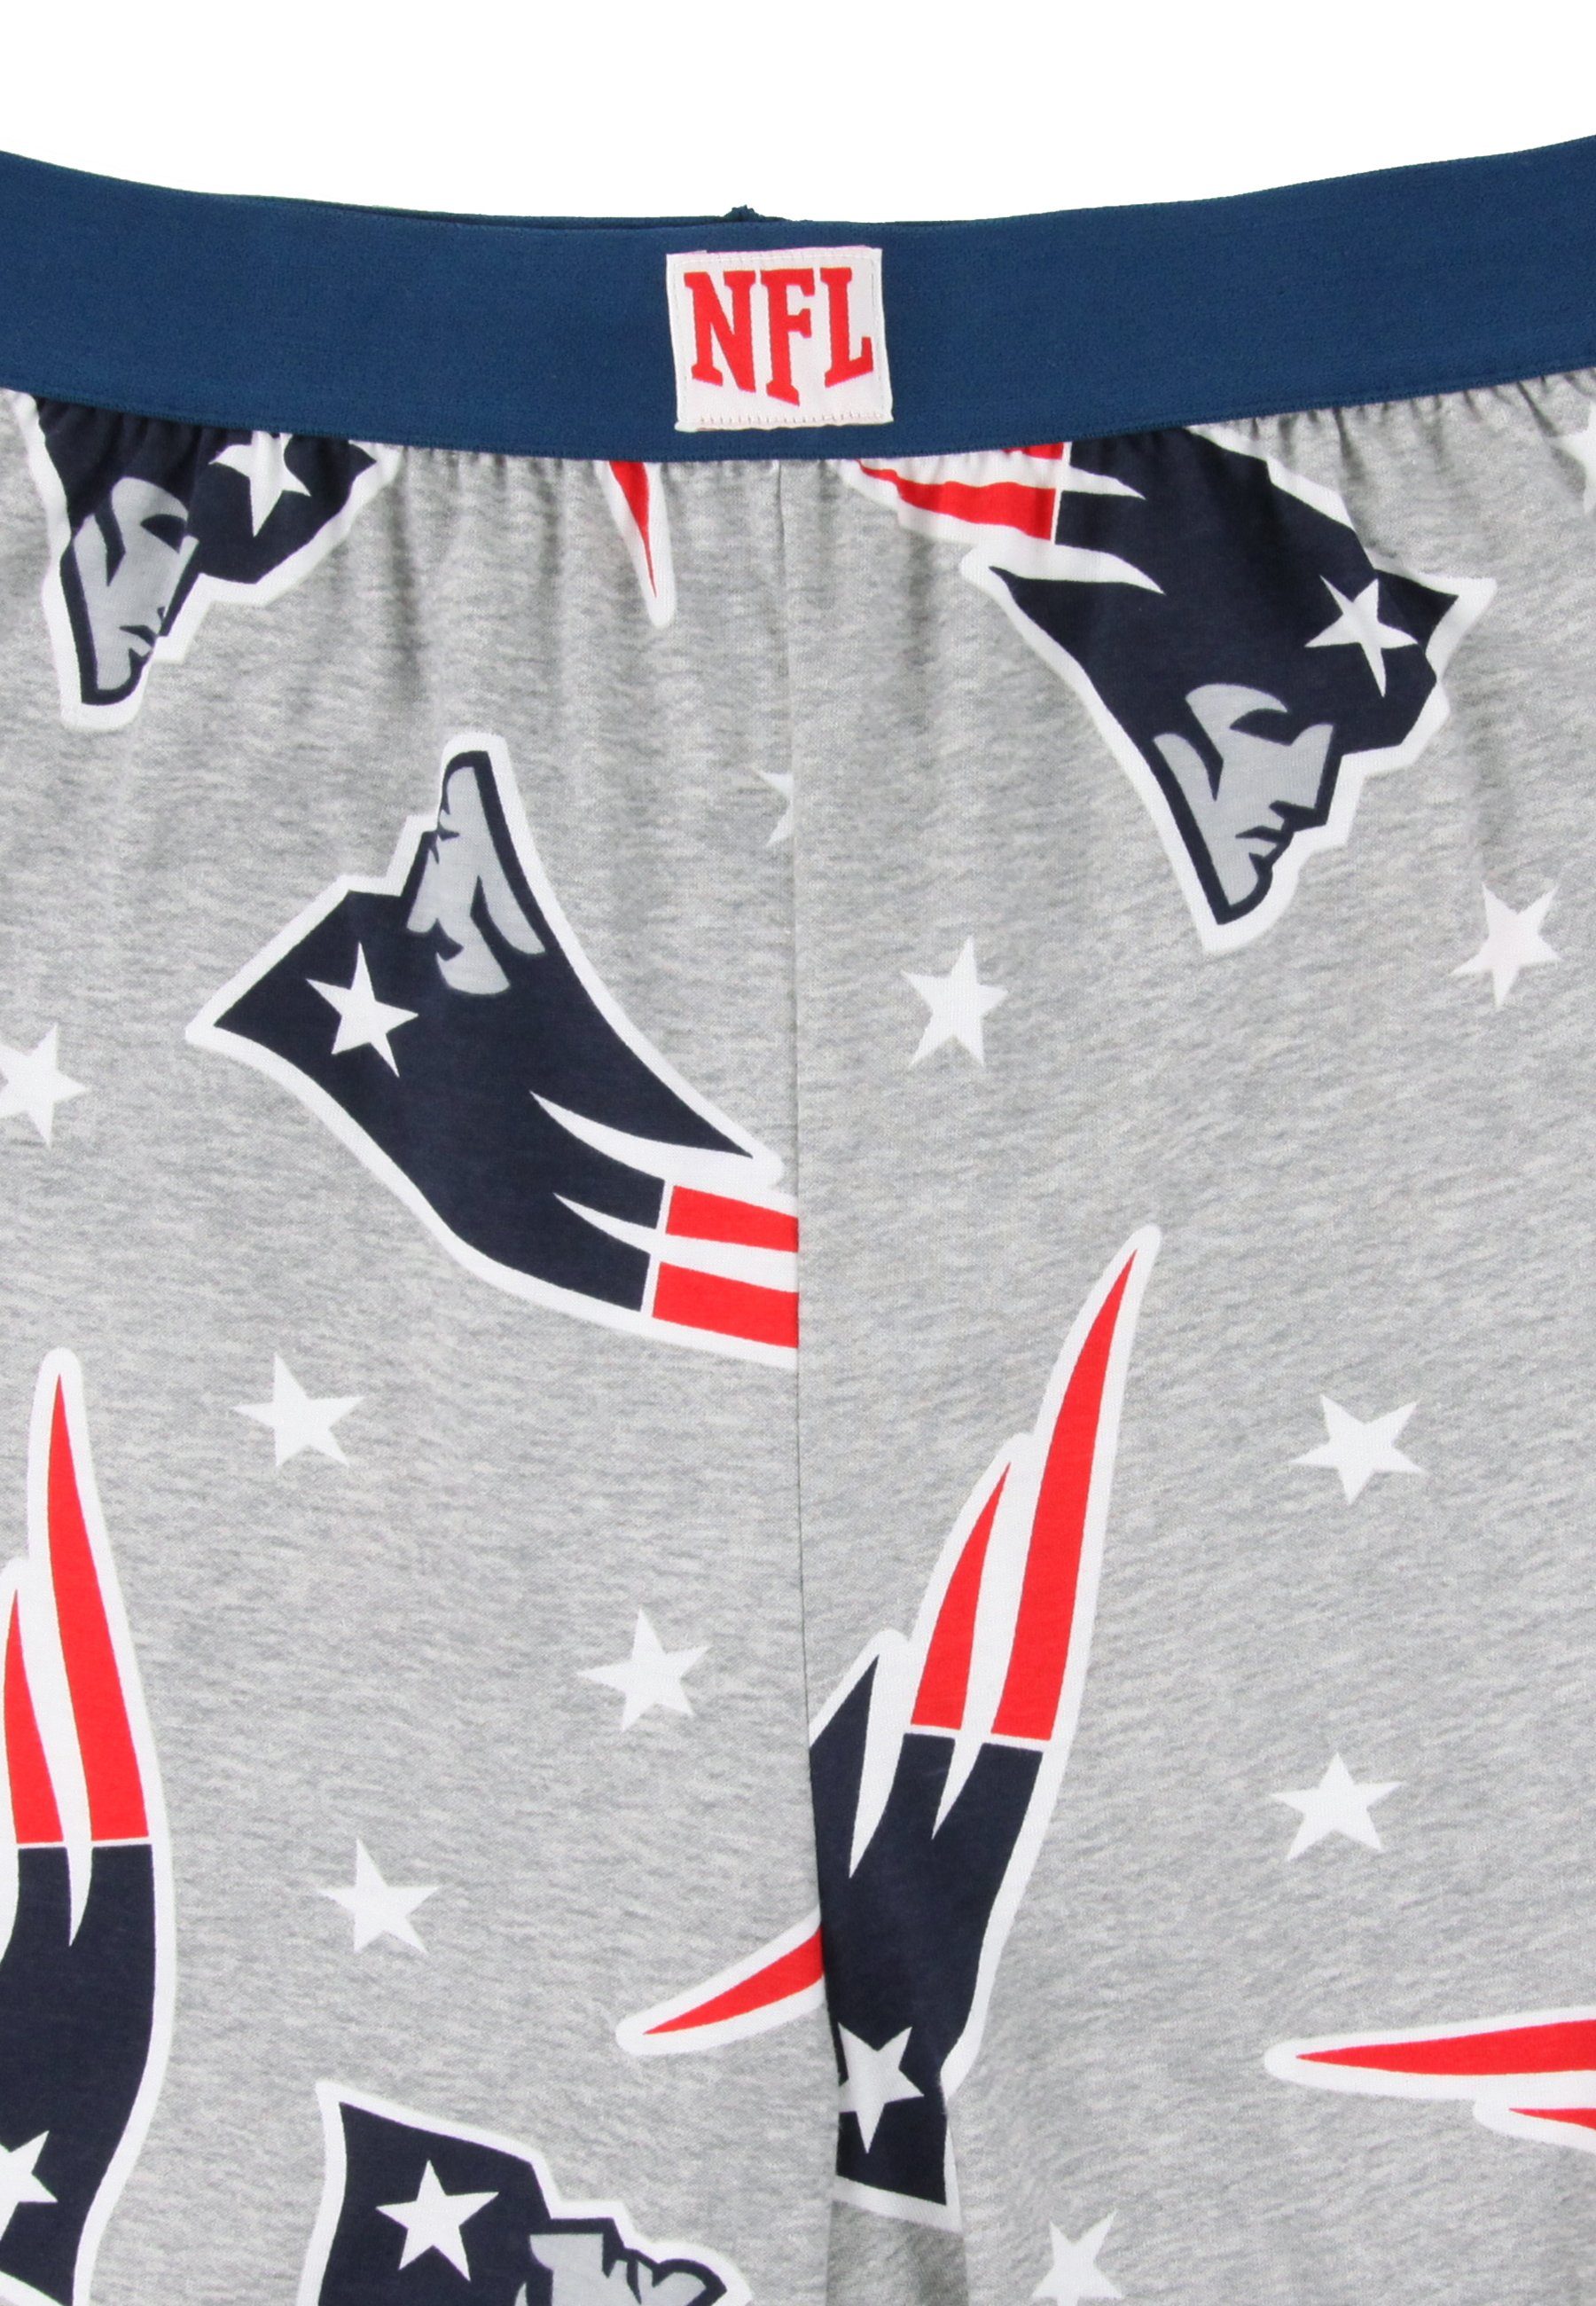 Recovered Loungepants Loungepants New Stars Patriots Logo England Marl NFL and Grey